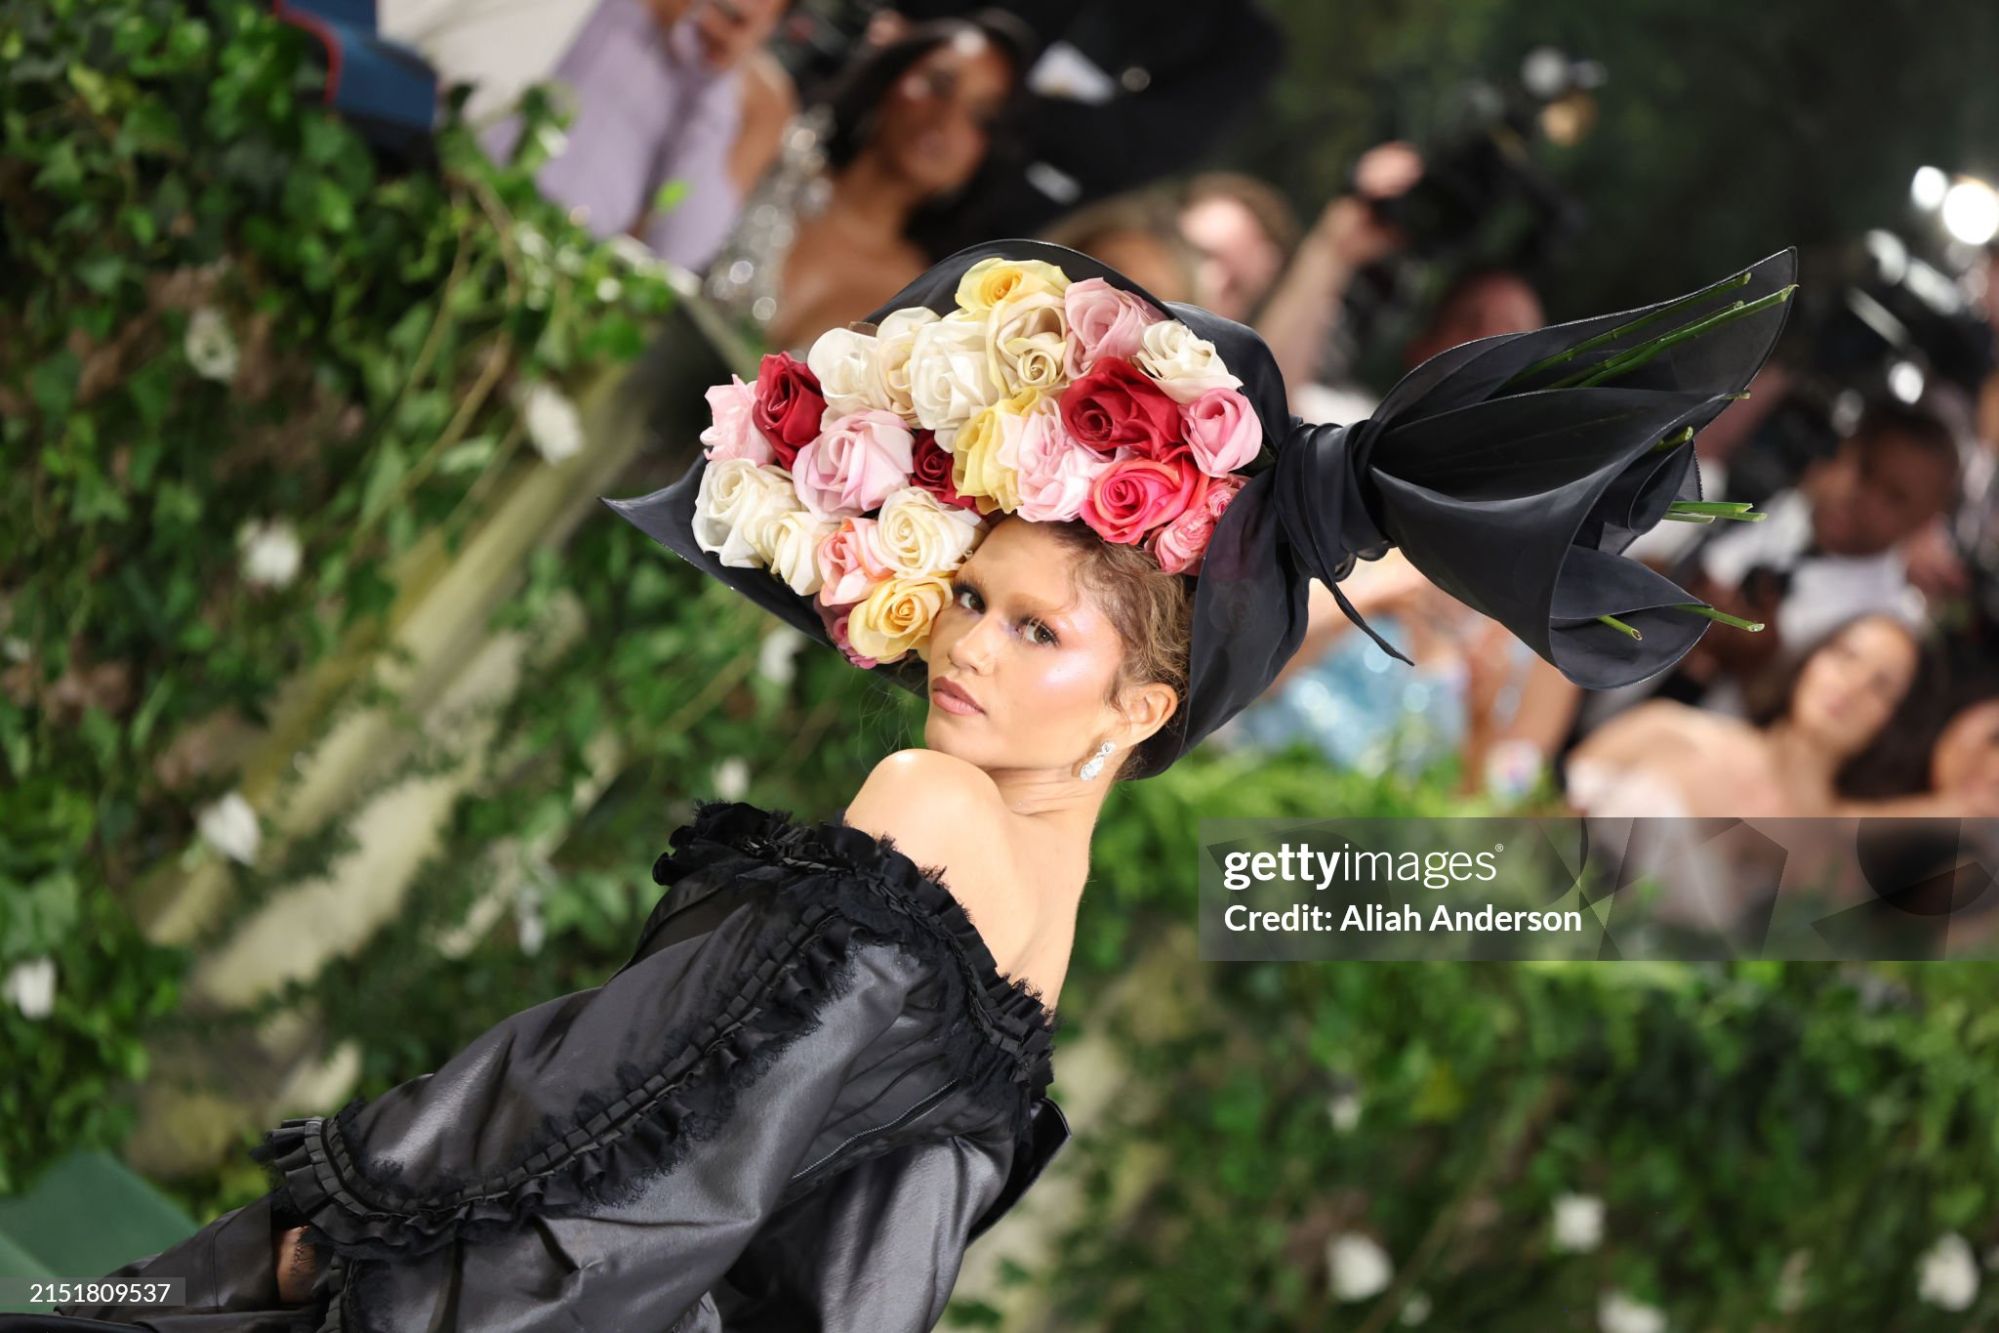 gettyimages-2151809537-2048x2048.jpg